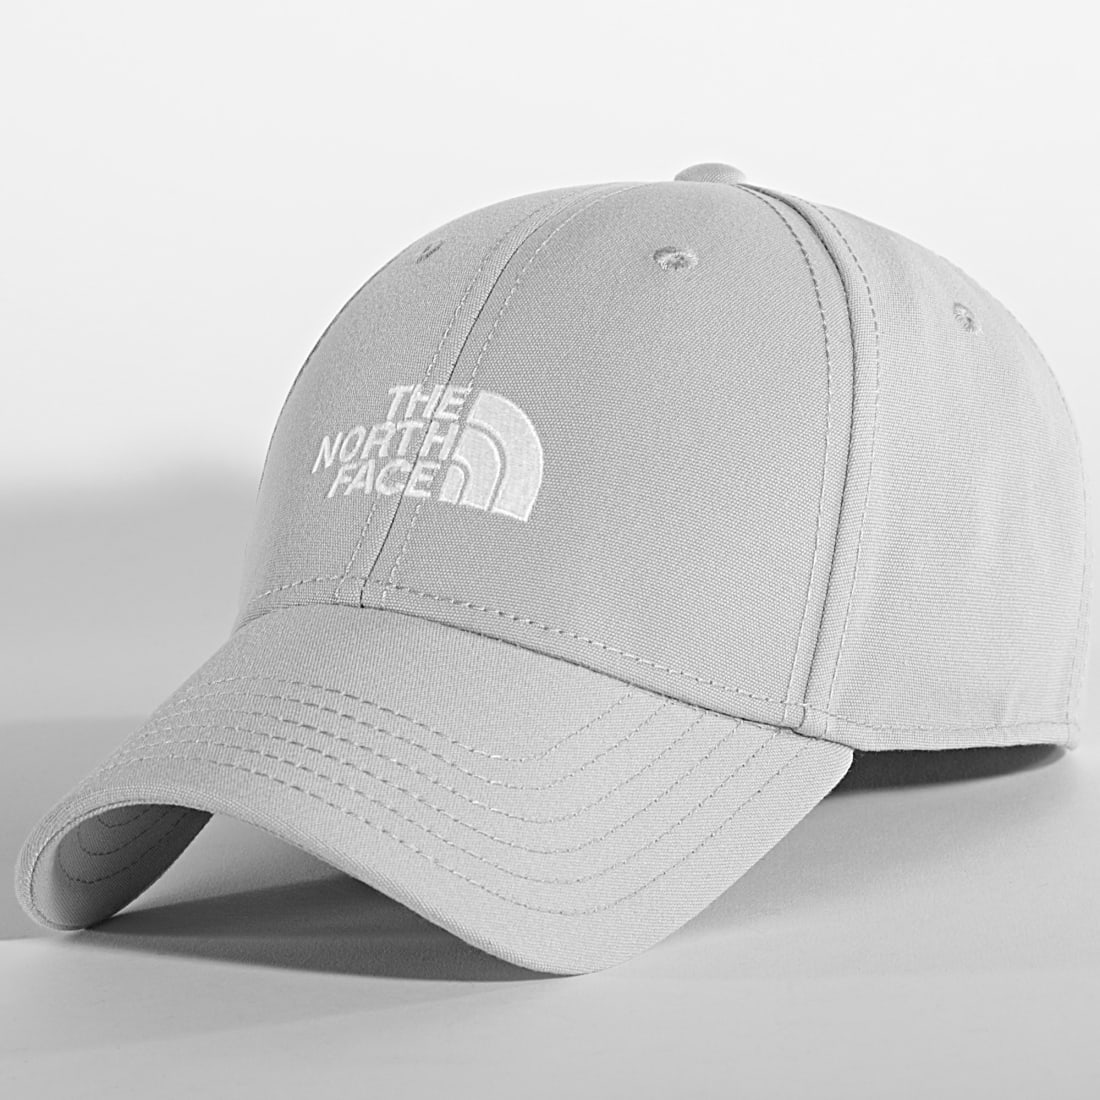 The North Face - Casquette RCYD 66 Classic Gris